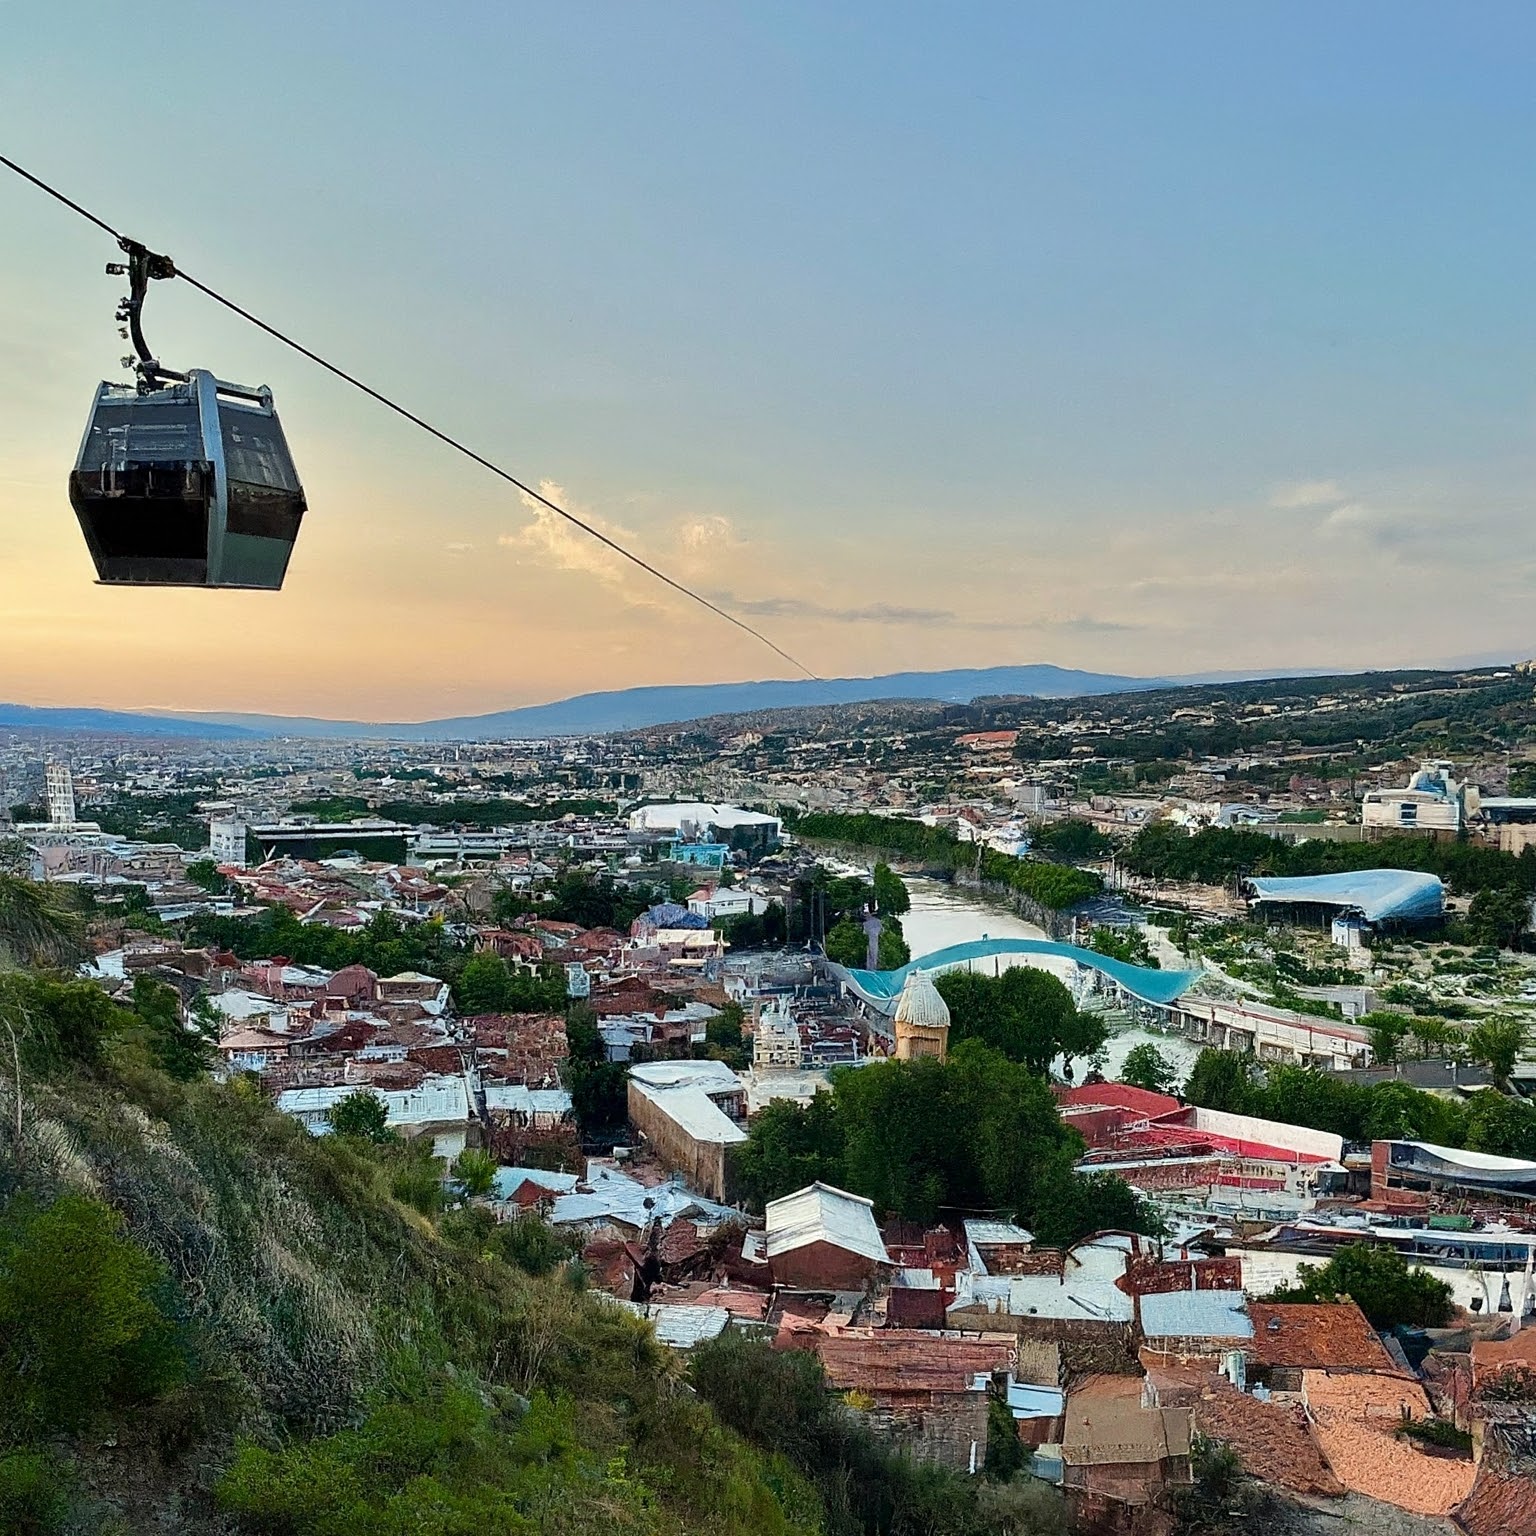 Tbilisi, Georgia: Cable car ride up a mountainside with panoramic city views and the Kura River.